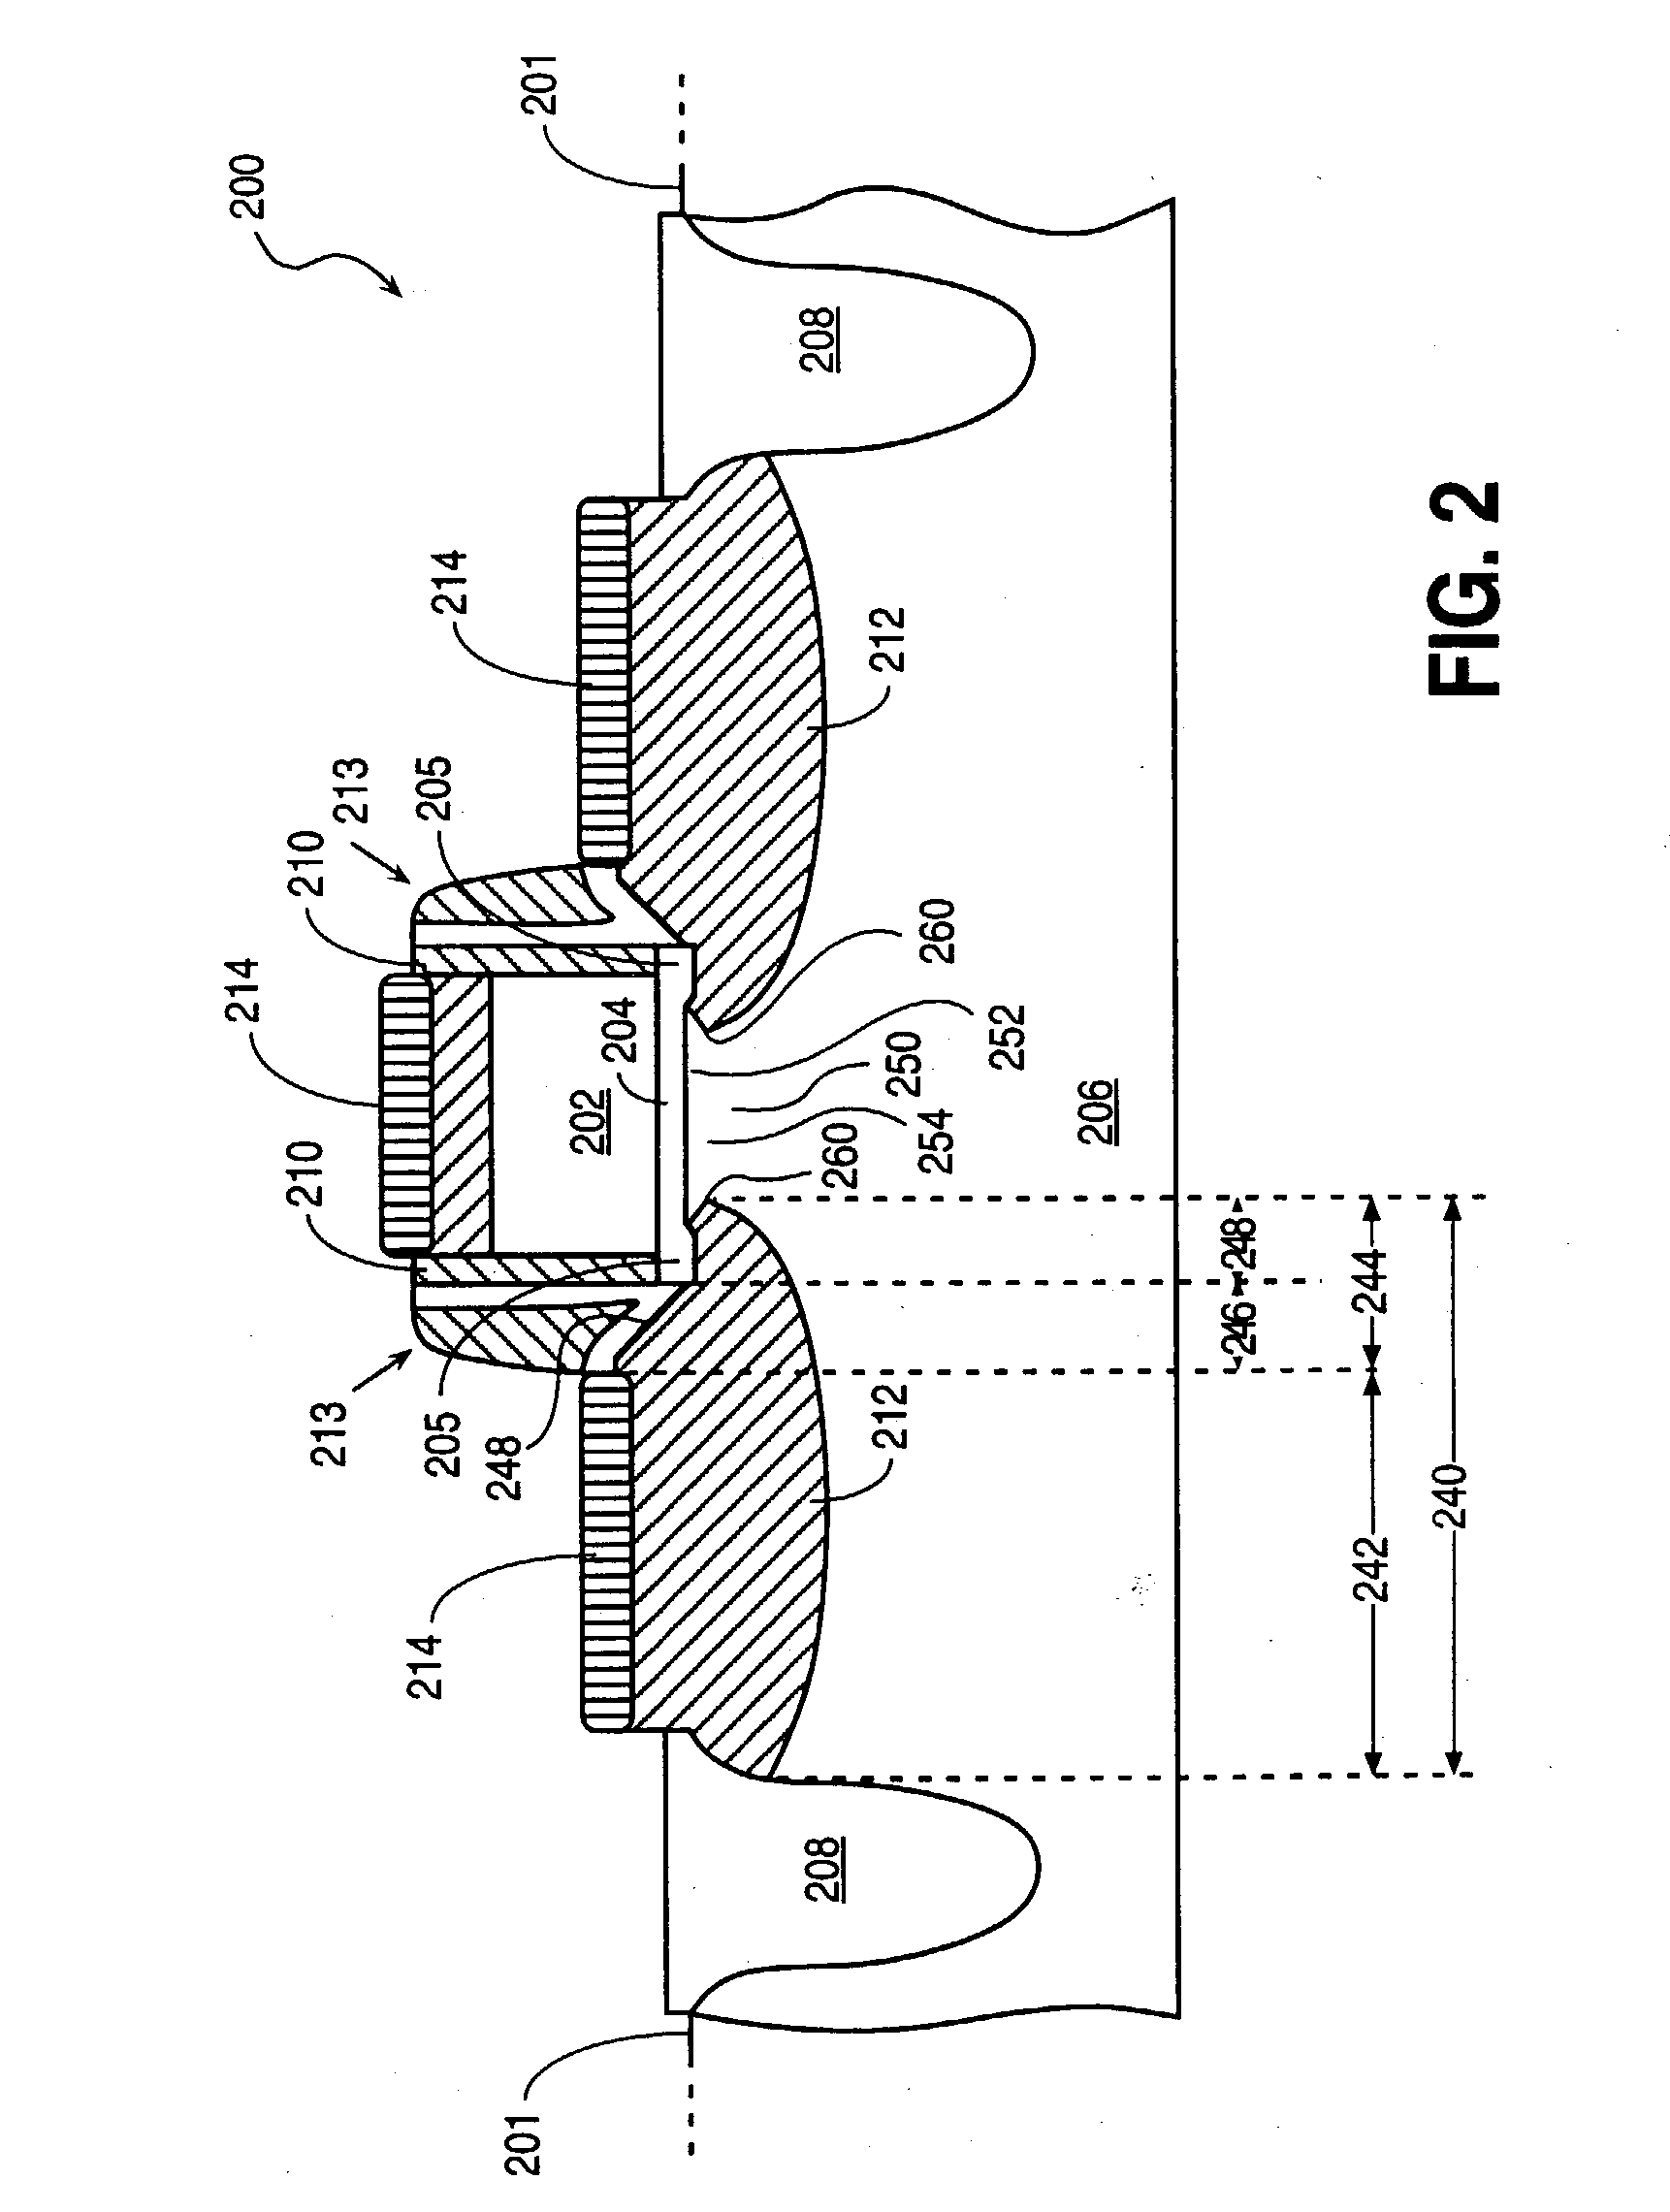 Novel MOS transistor structure and method of fabrication